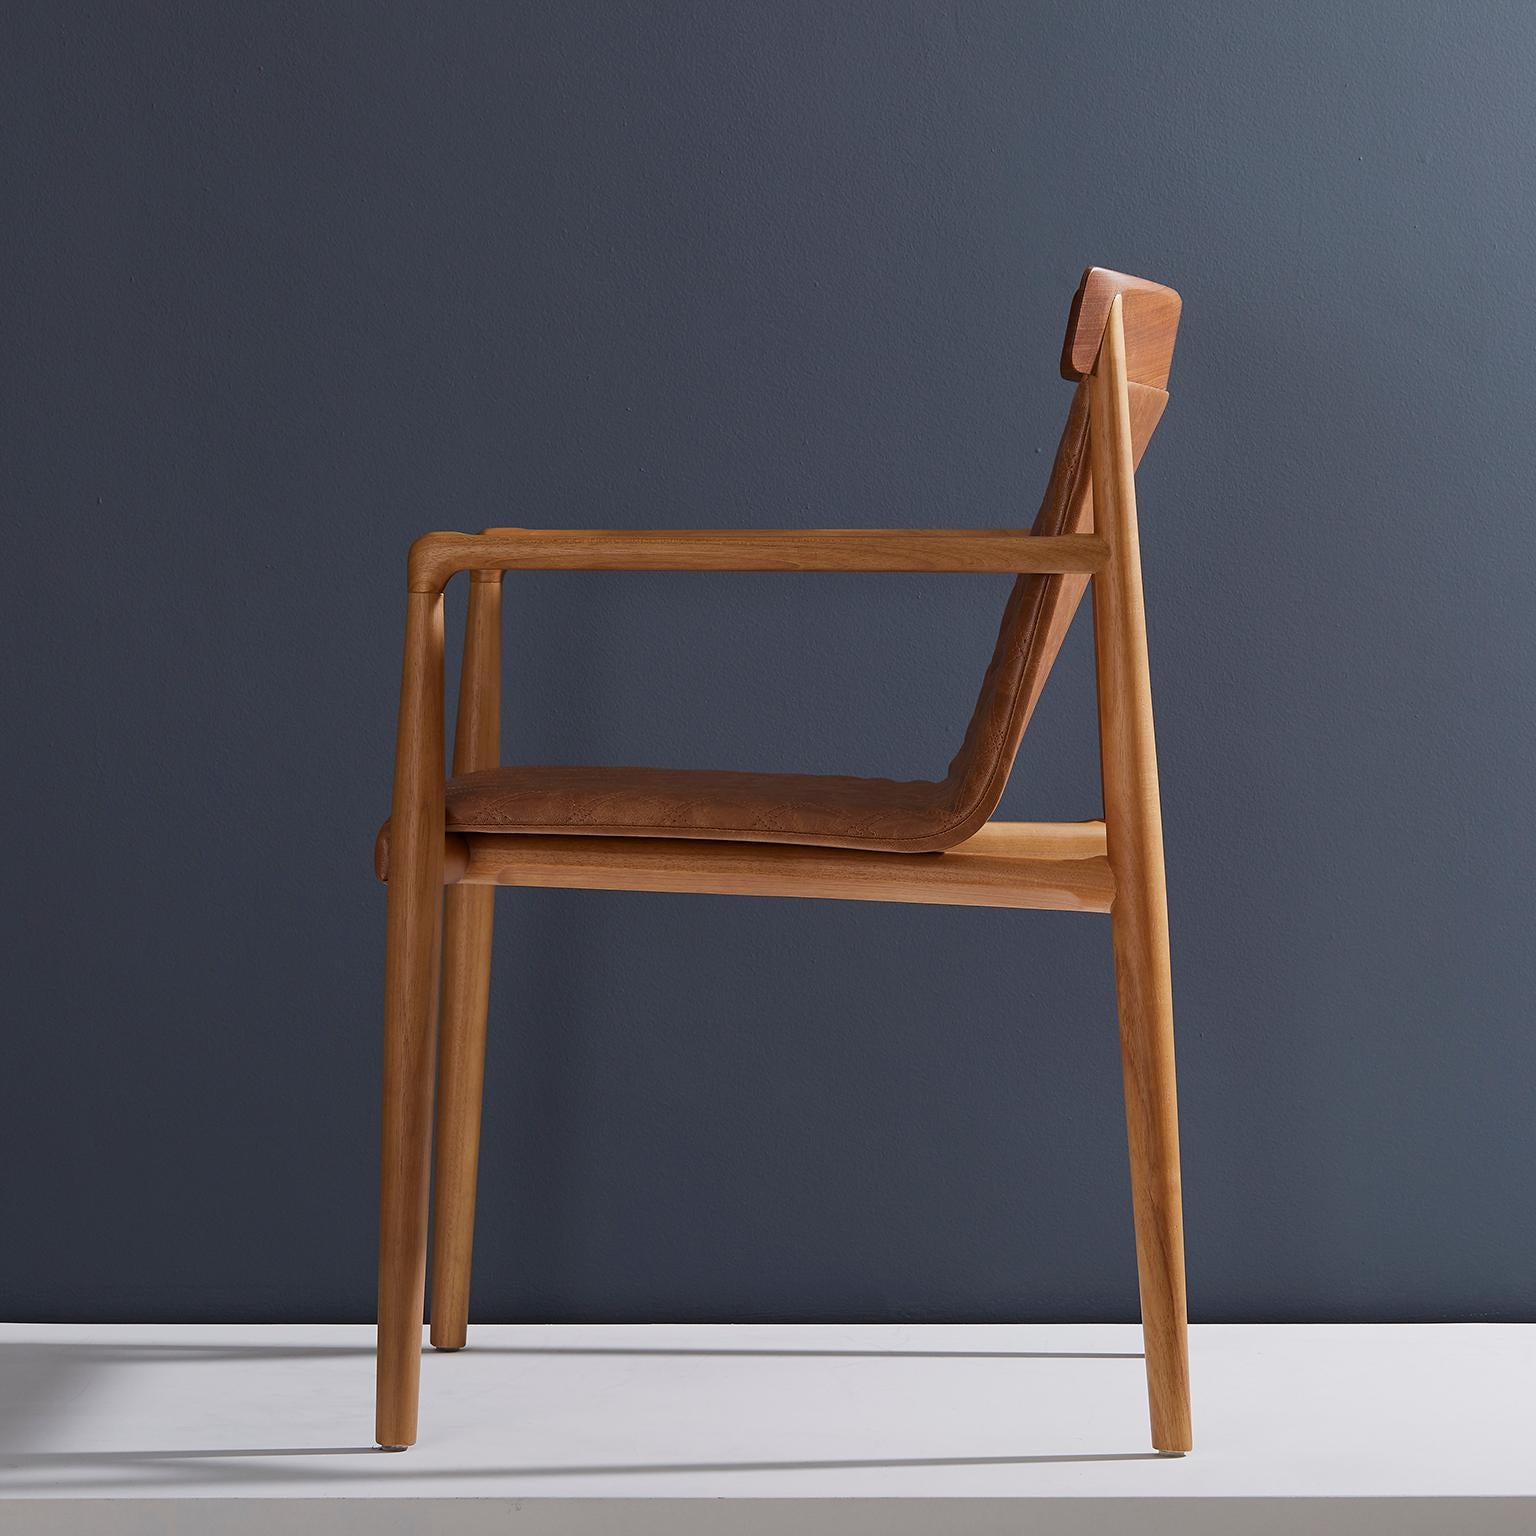 Brazilian Contemporary Chair in Natural Solid Wood, Upholstered Leather, with Arms For Sale